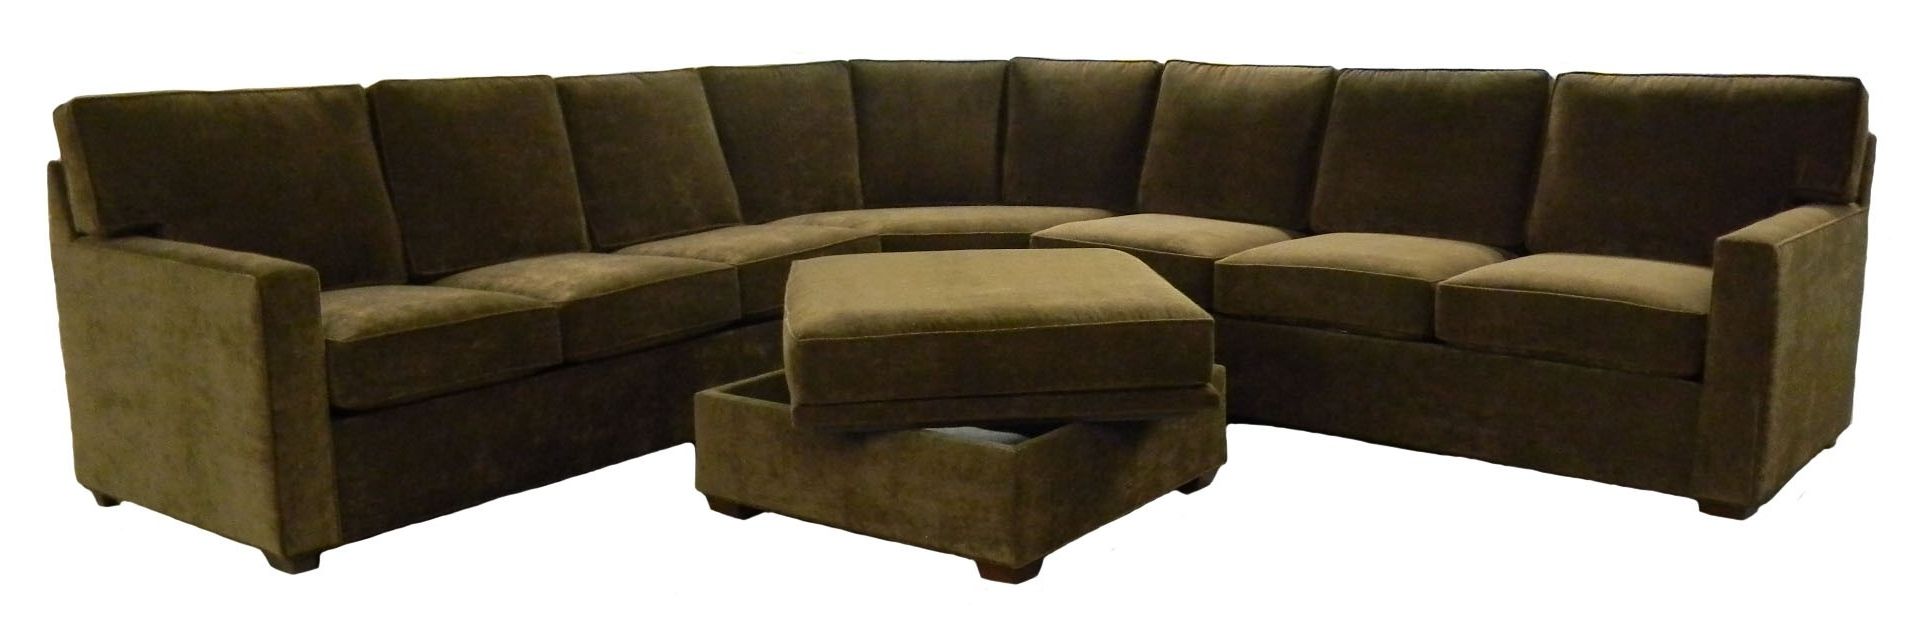 Lovely Customizable Sectional Sofa – Buildsimplehome Within Most Current Customizable Sectional Sofas (View 14 of 15)